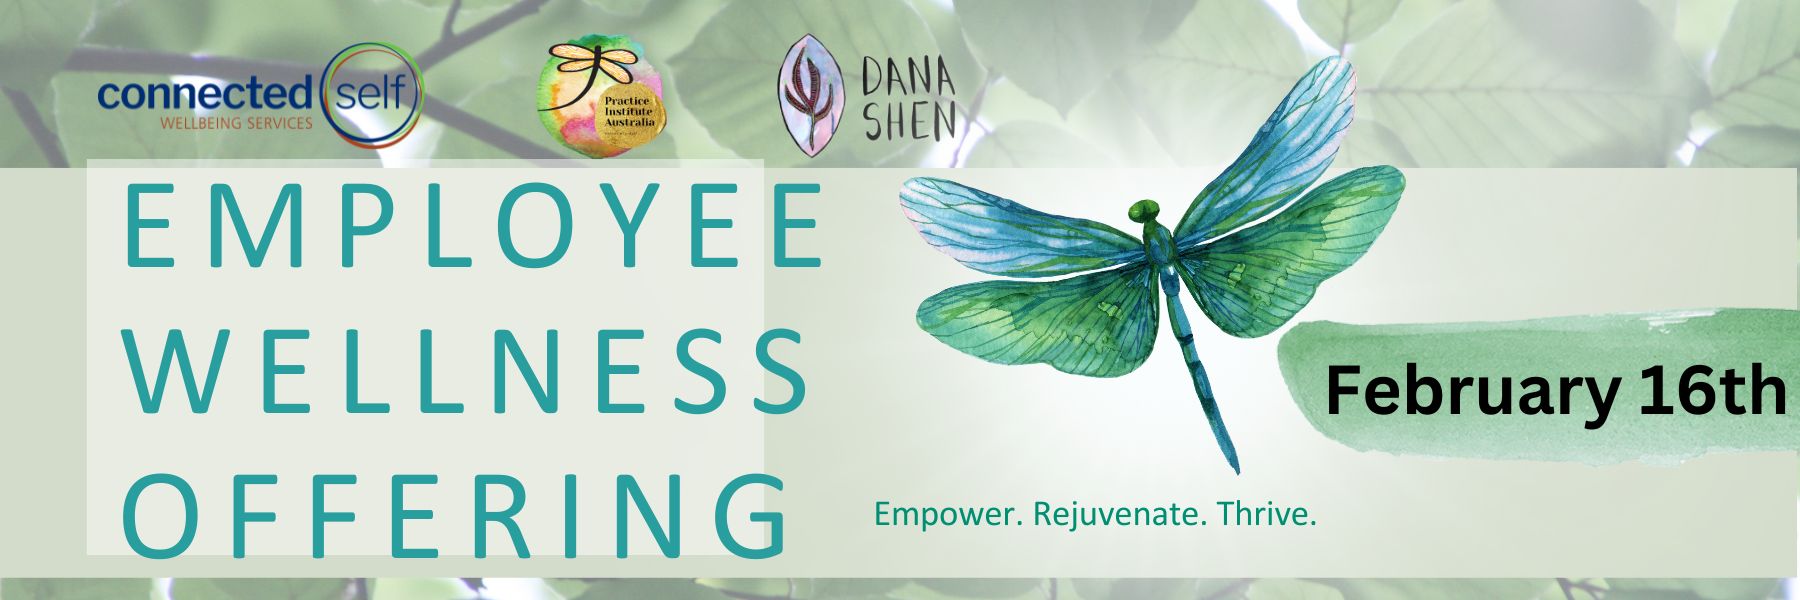 Employee Wellbeing Offering- February 16th